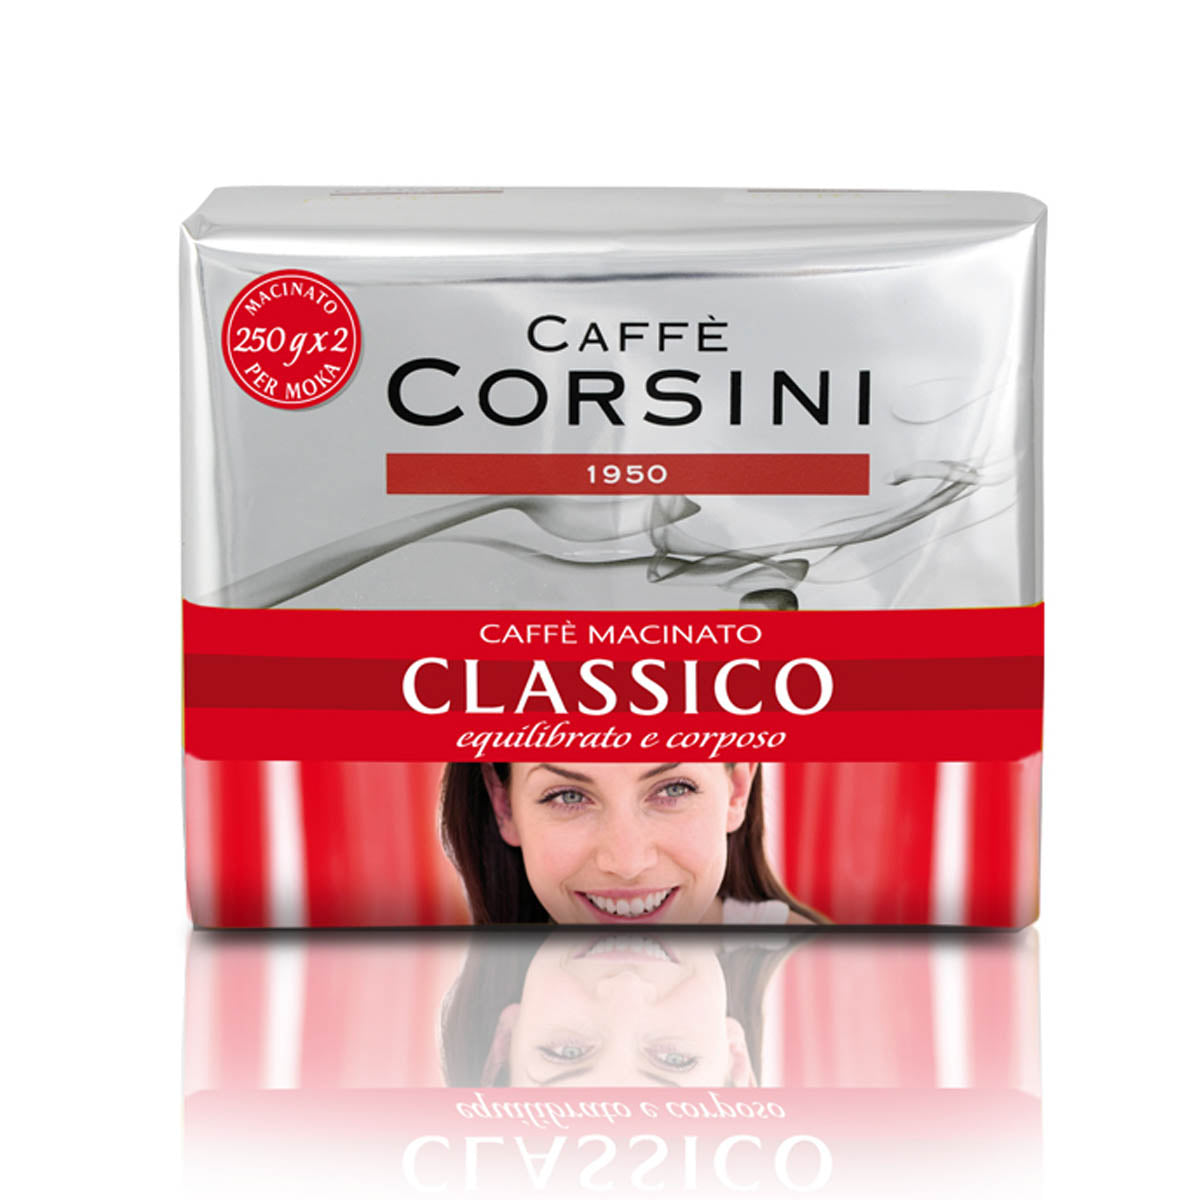 Ground coffee | Classico | Pack containing 2 packets of 250g each | Box of 10 packs